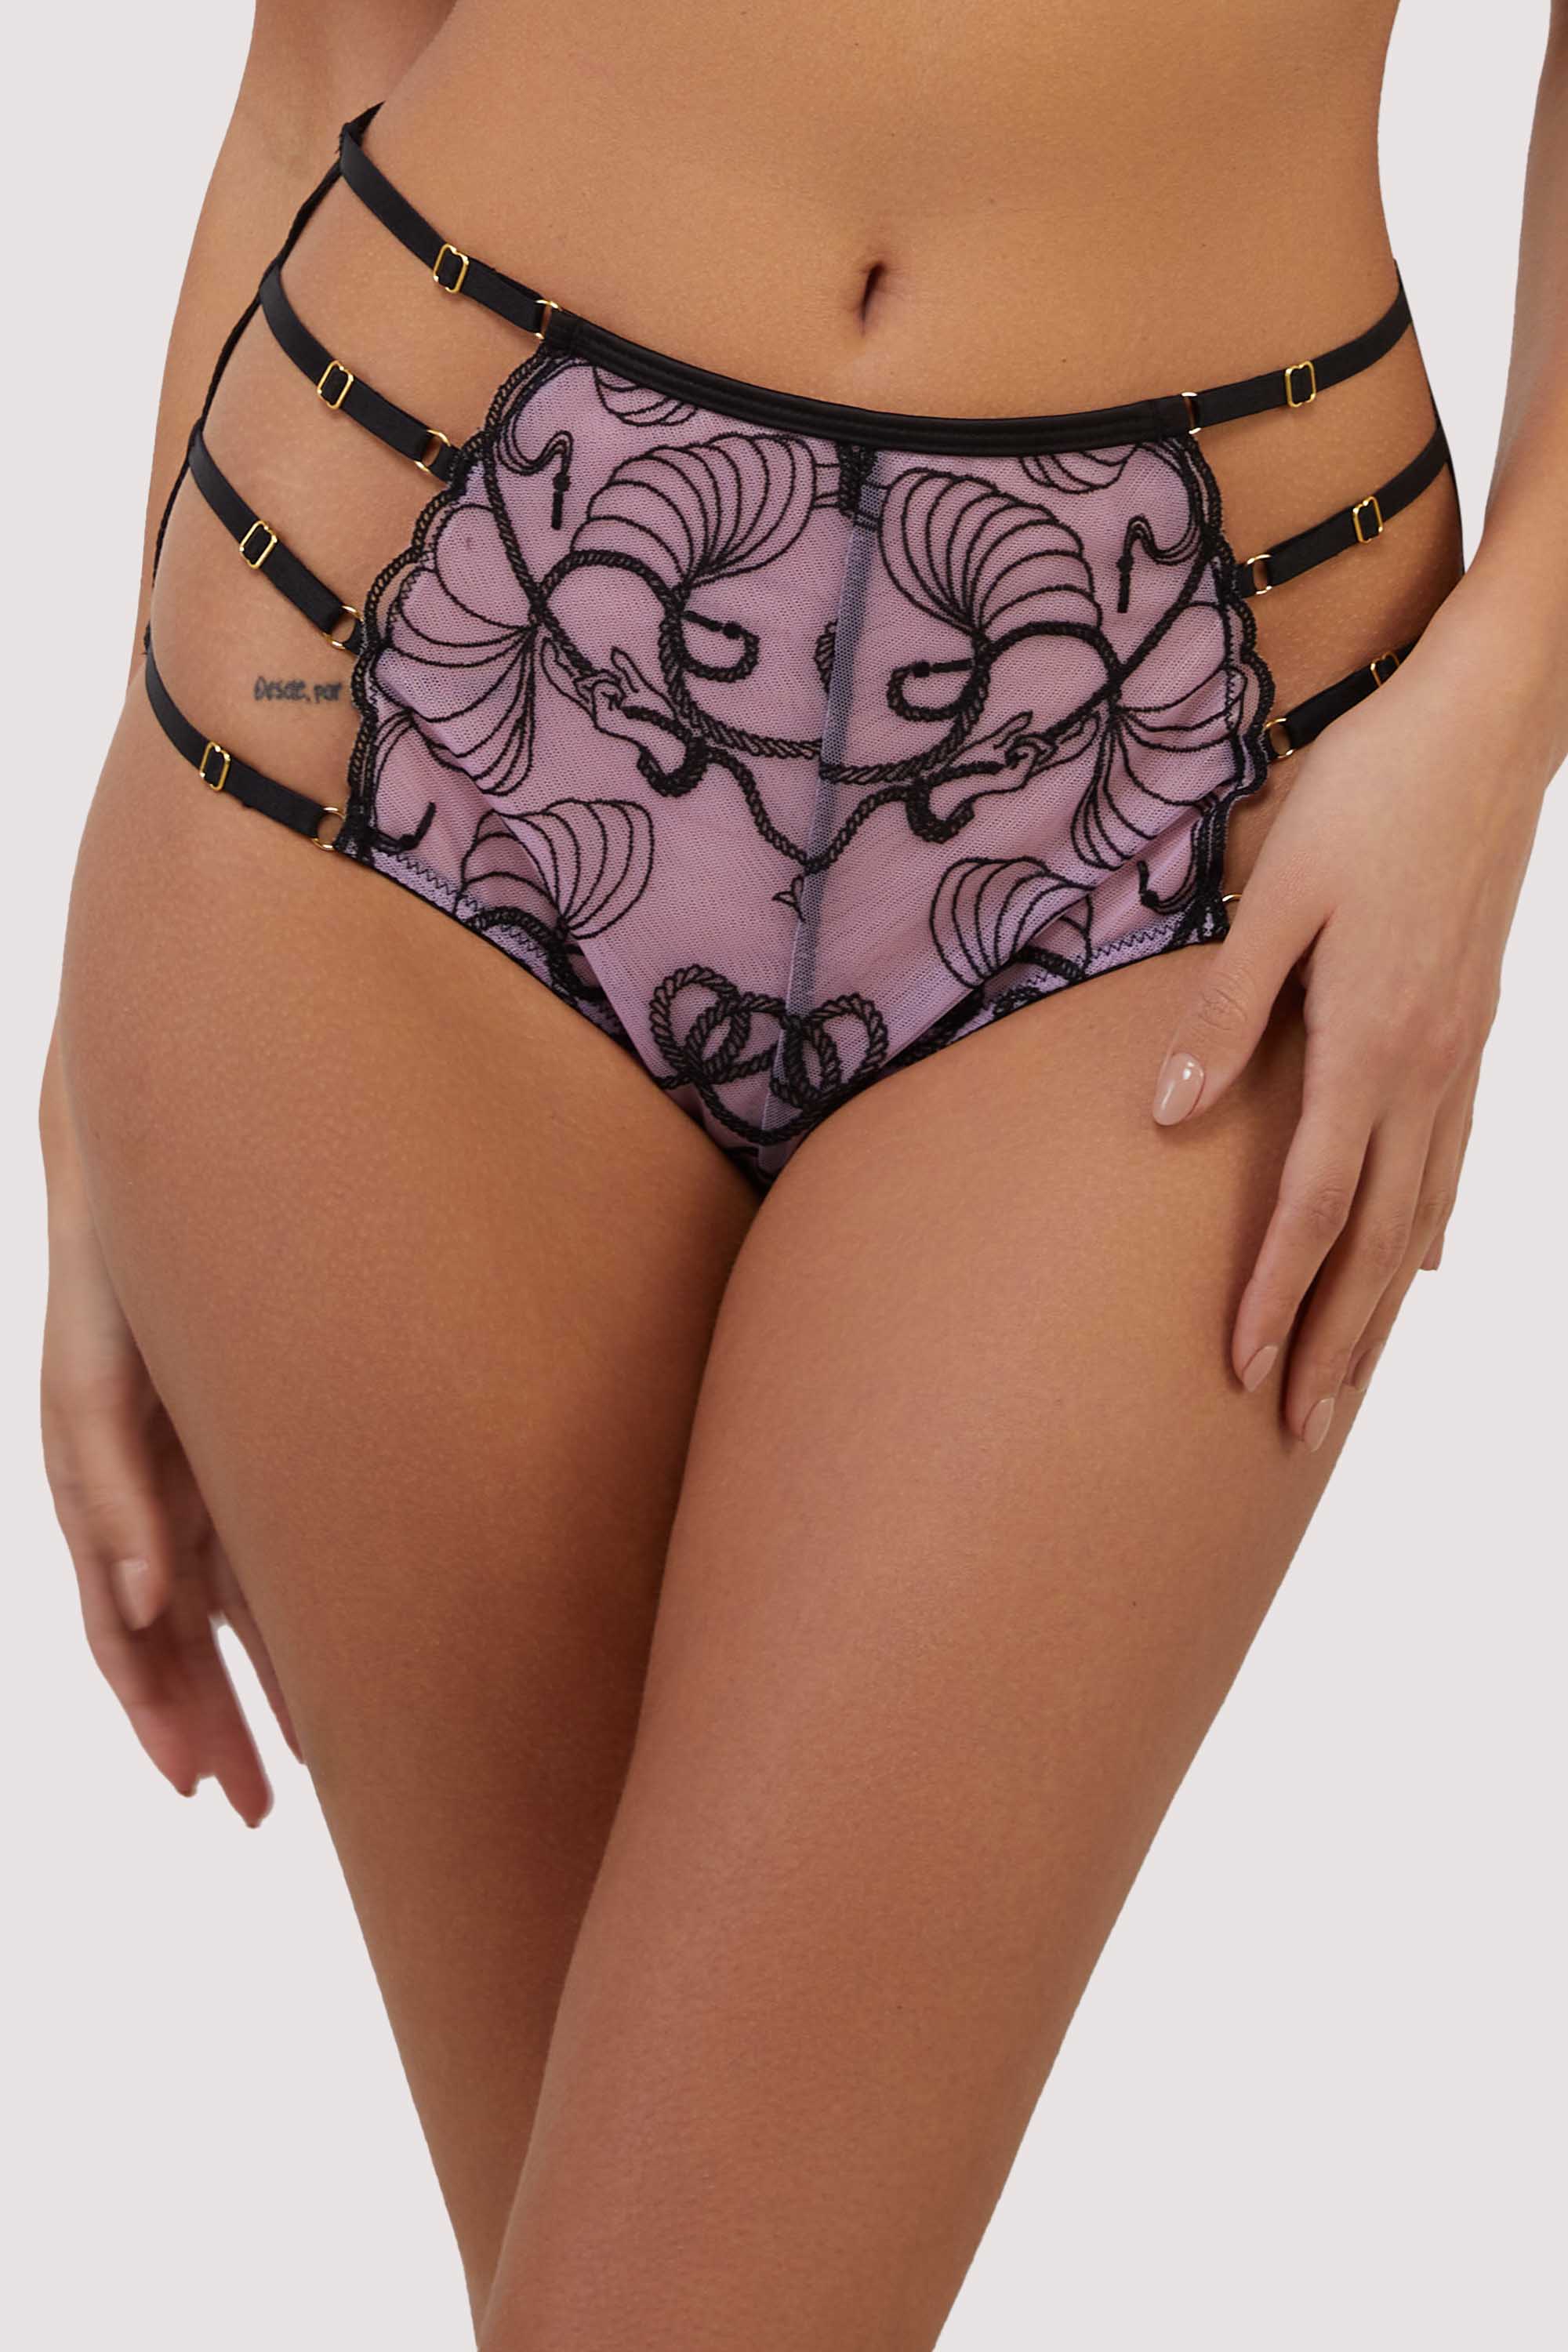 Jessie Pink and Black Whip Embroidery High Waist Brief 10